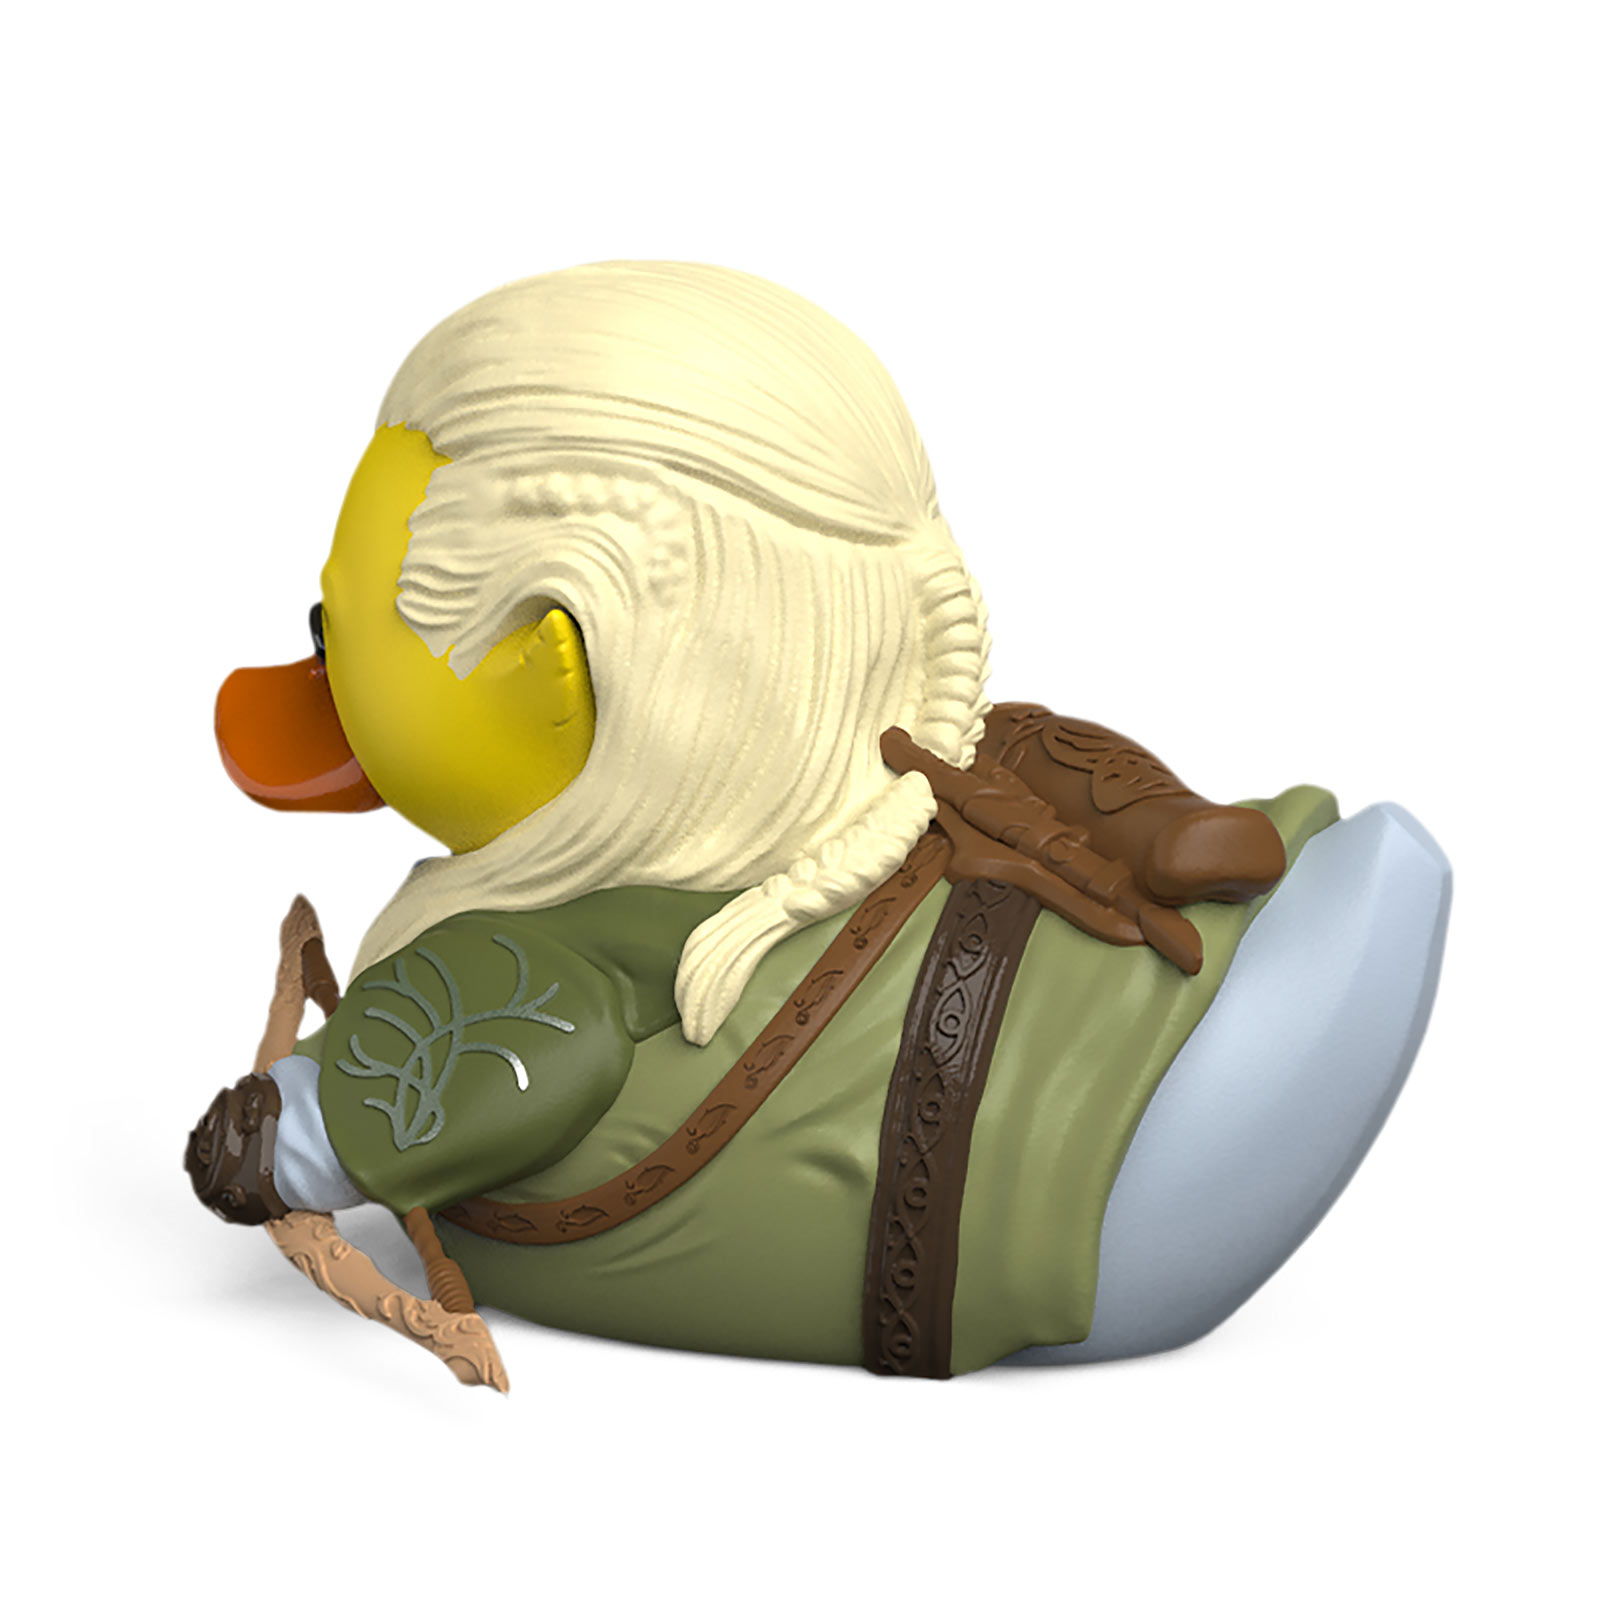 Lord of the Rings - Legolas TUBBZ Decorative Duck